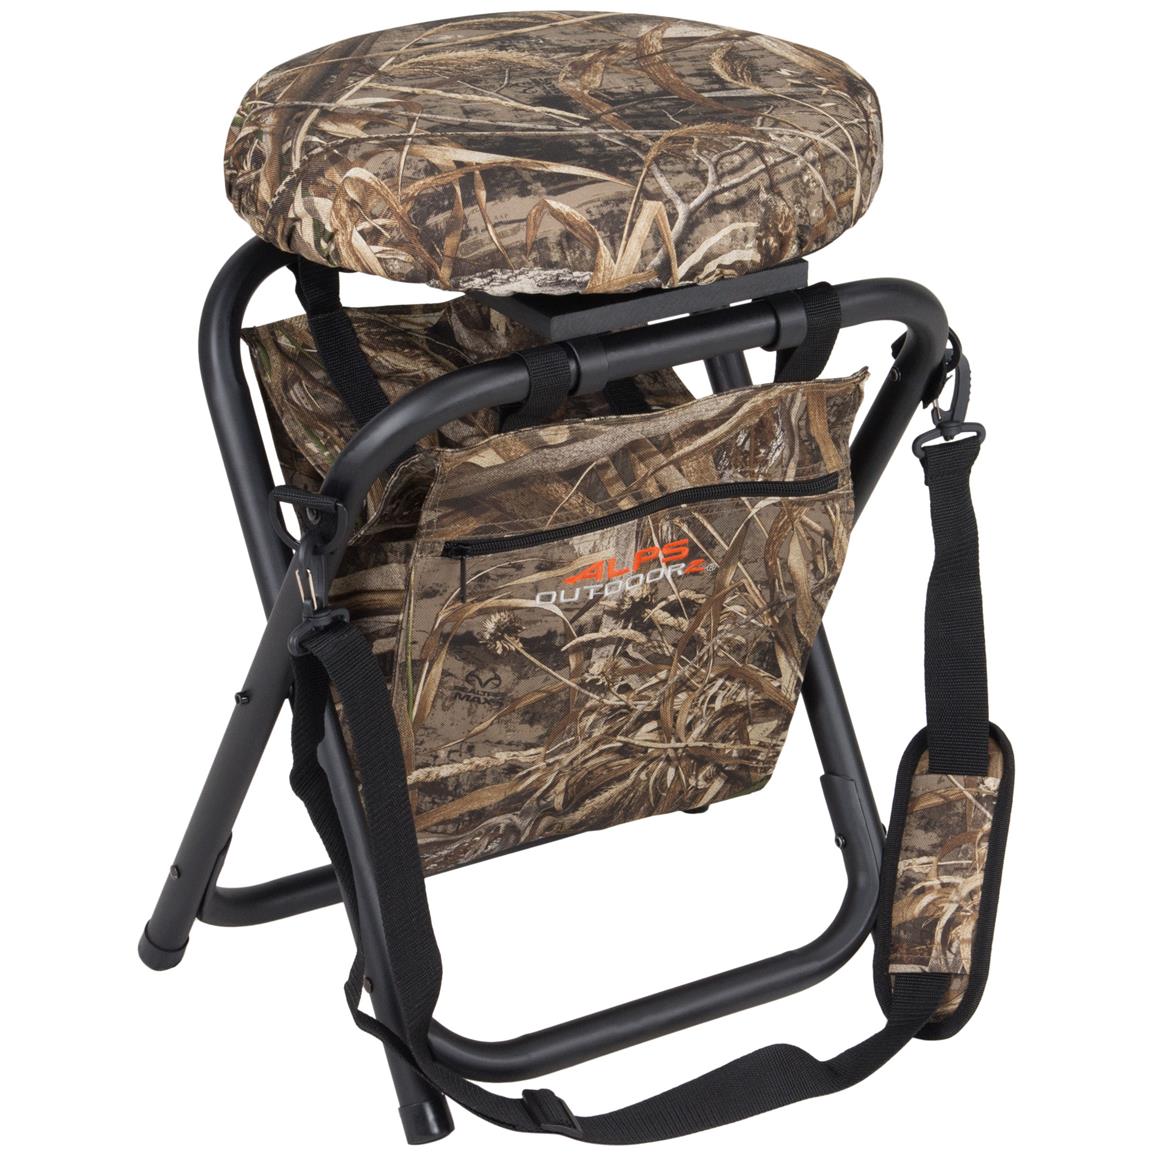 Guide Gear Magnum Turkey Chair Padded Armrests Mossy Oak NWTF Obsession Camo New 